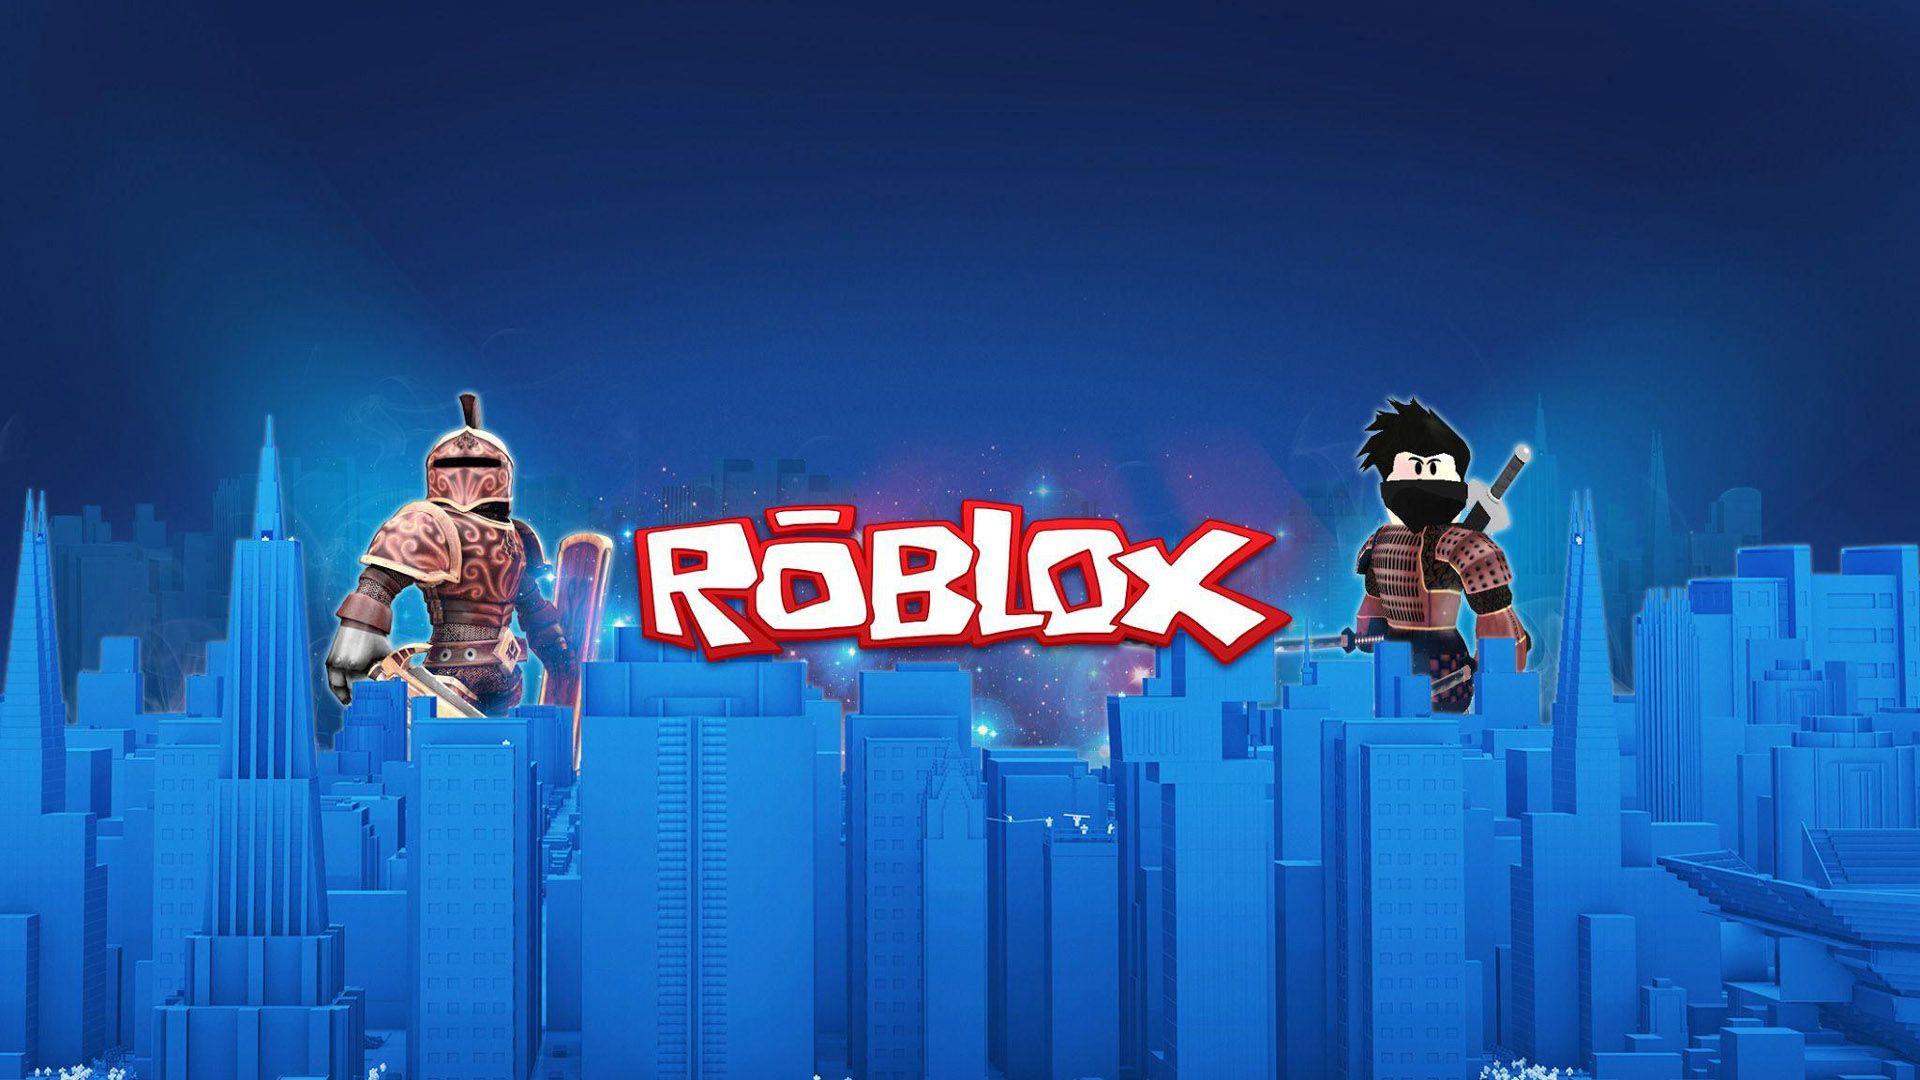 Roblox Blue Wallpapers Top Free Roblox Blue Backgrounds Wallpaperaccess - roblox light blue wallpaper